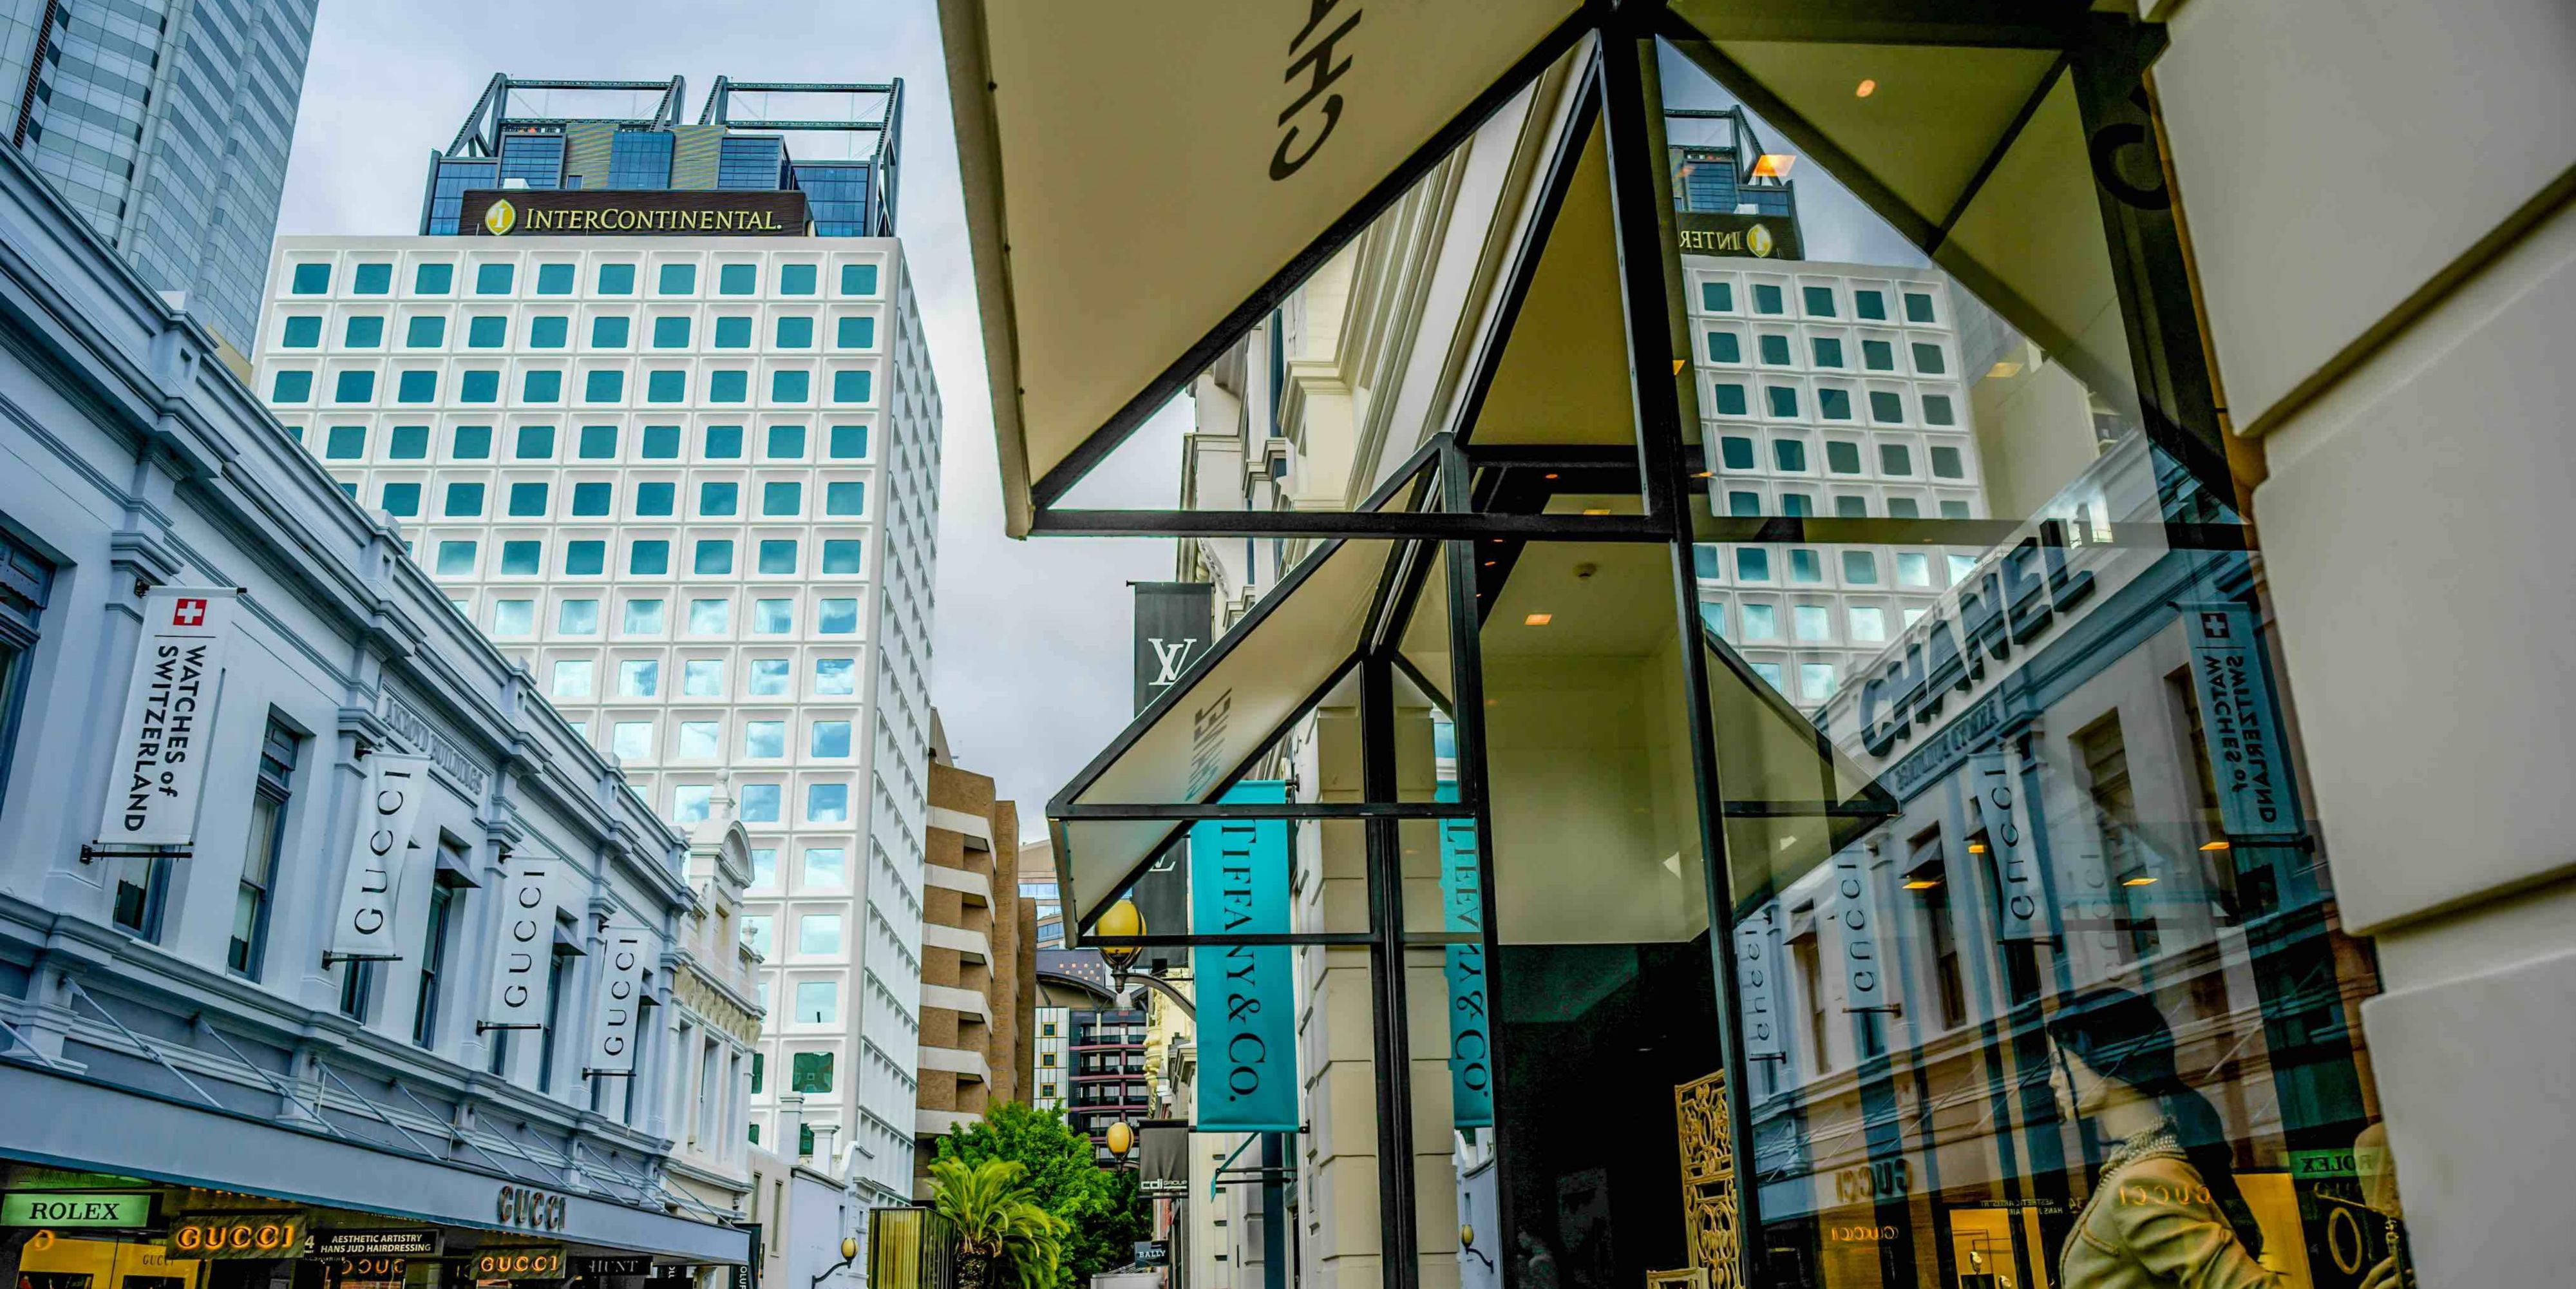 Staying at InterContinental Perth City Centre means you will be in the heart of the city where theatre, ballet, arts, shows and concerts are all right at your fingertips. For the best tips and information on what to do in Perth, contact our friendly Concierge team.